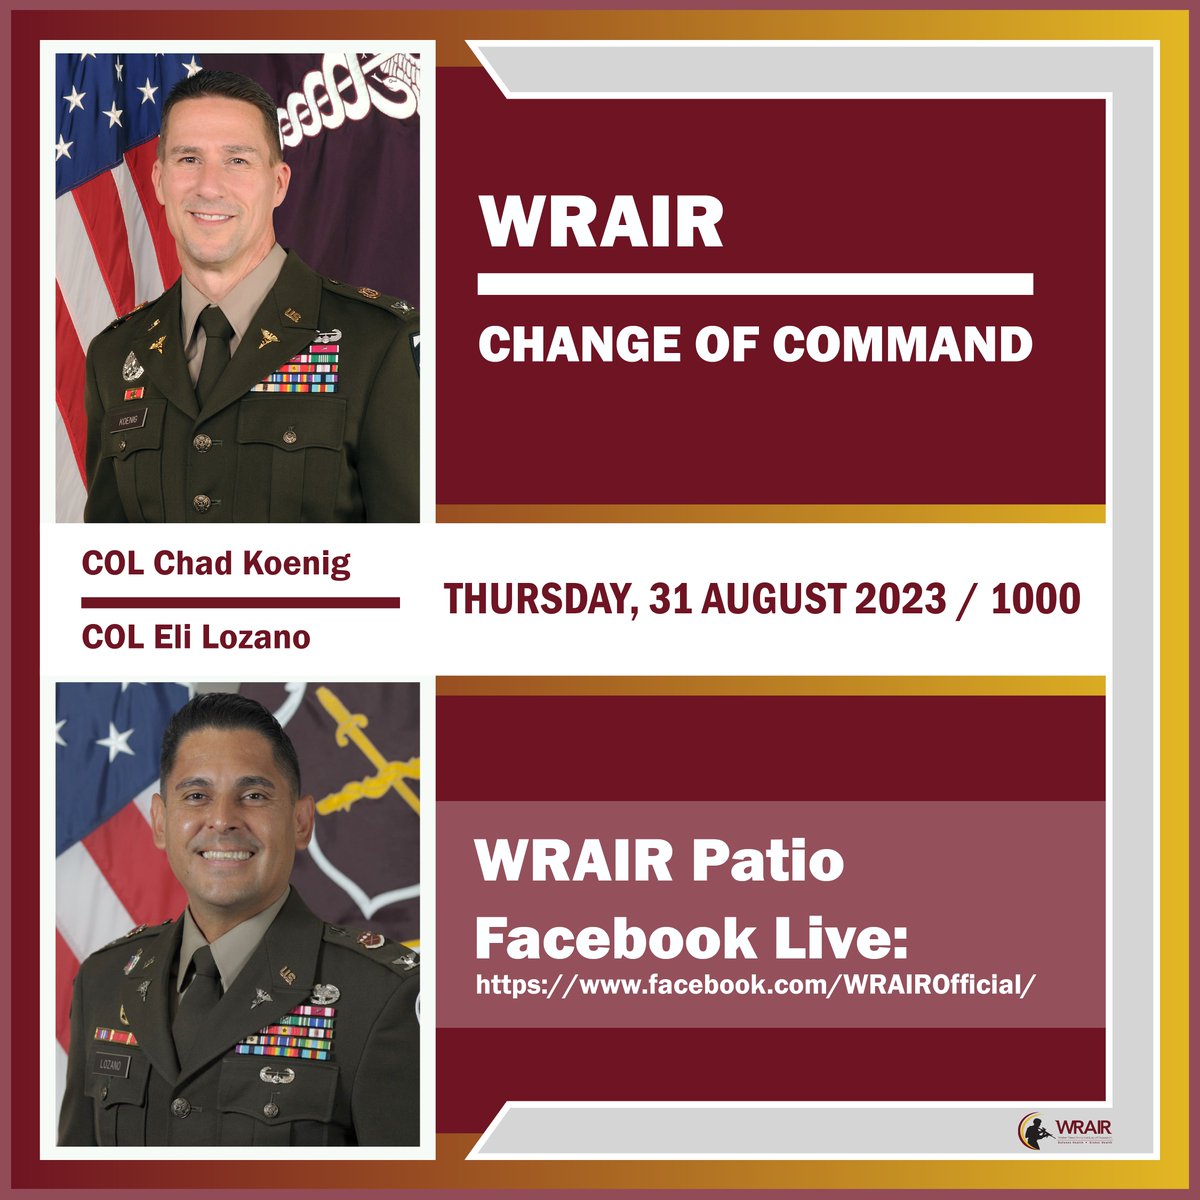 Join us on Aug 31 at 1000 as we welcome our new commander, COL Eli Lozano, and bid farewell to COL Chad Koenig. Watch here: fb.me/e/3OVbRGO5Y